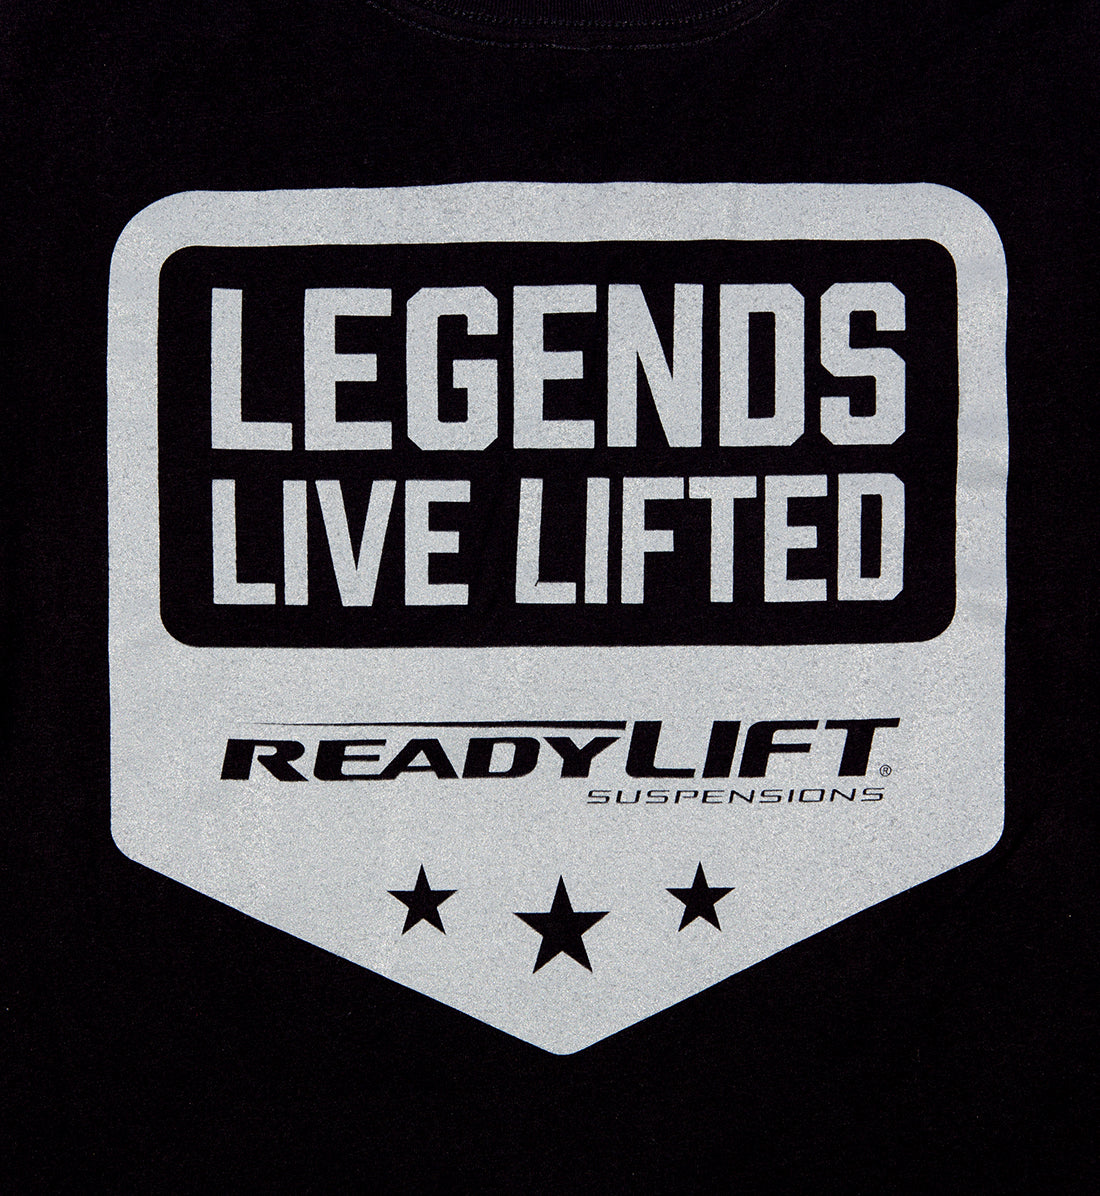 ReadyLift LEGENDS LIVE LIFTED Short Sleeve Tee